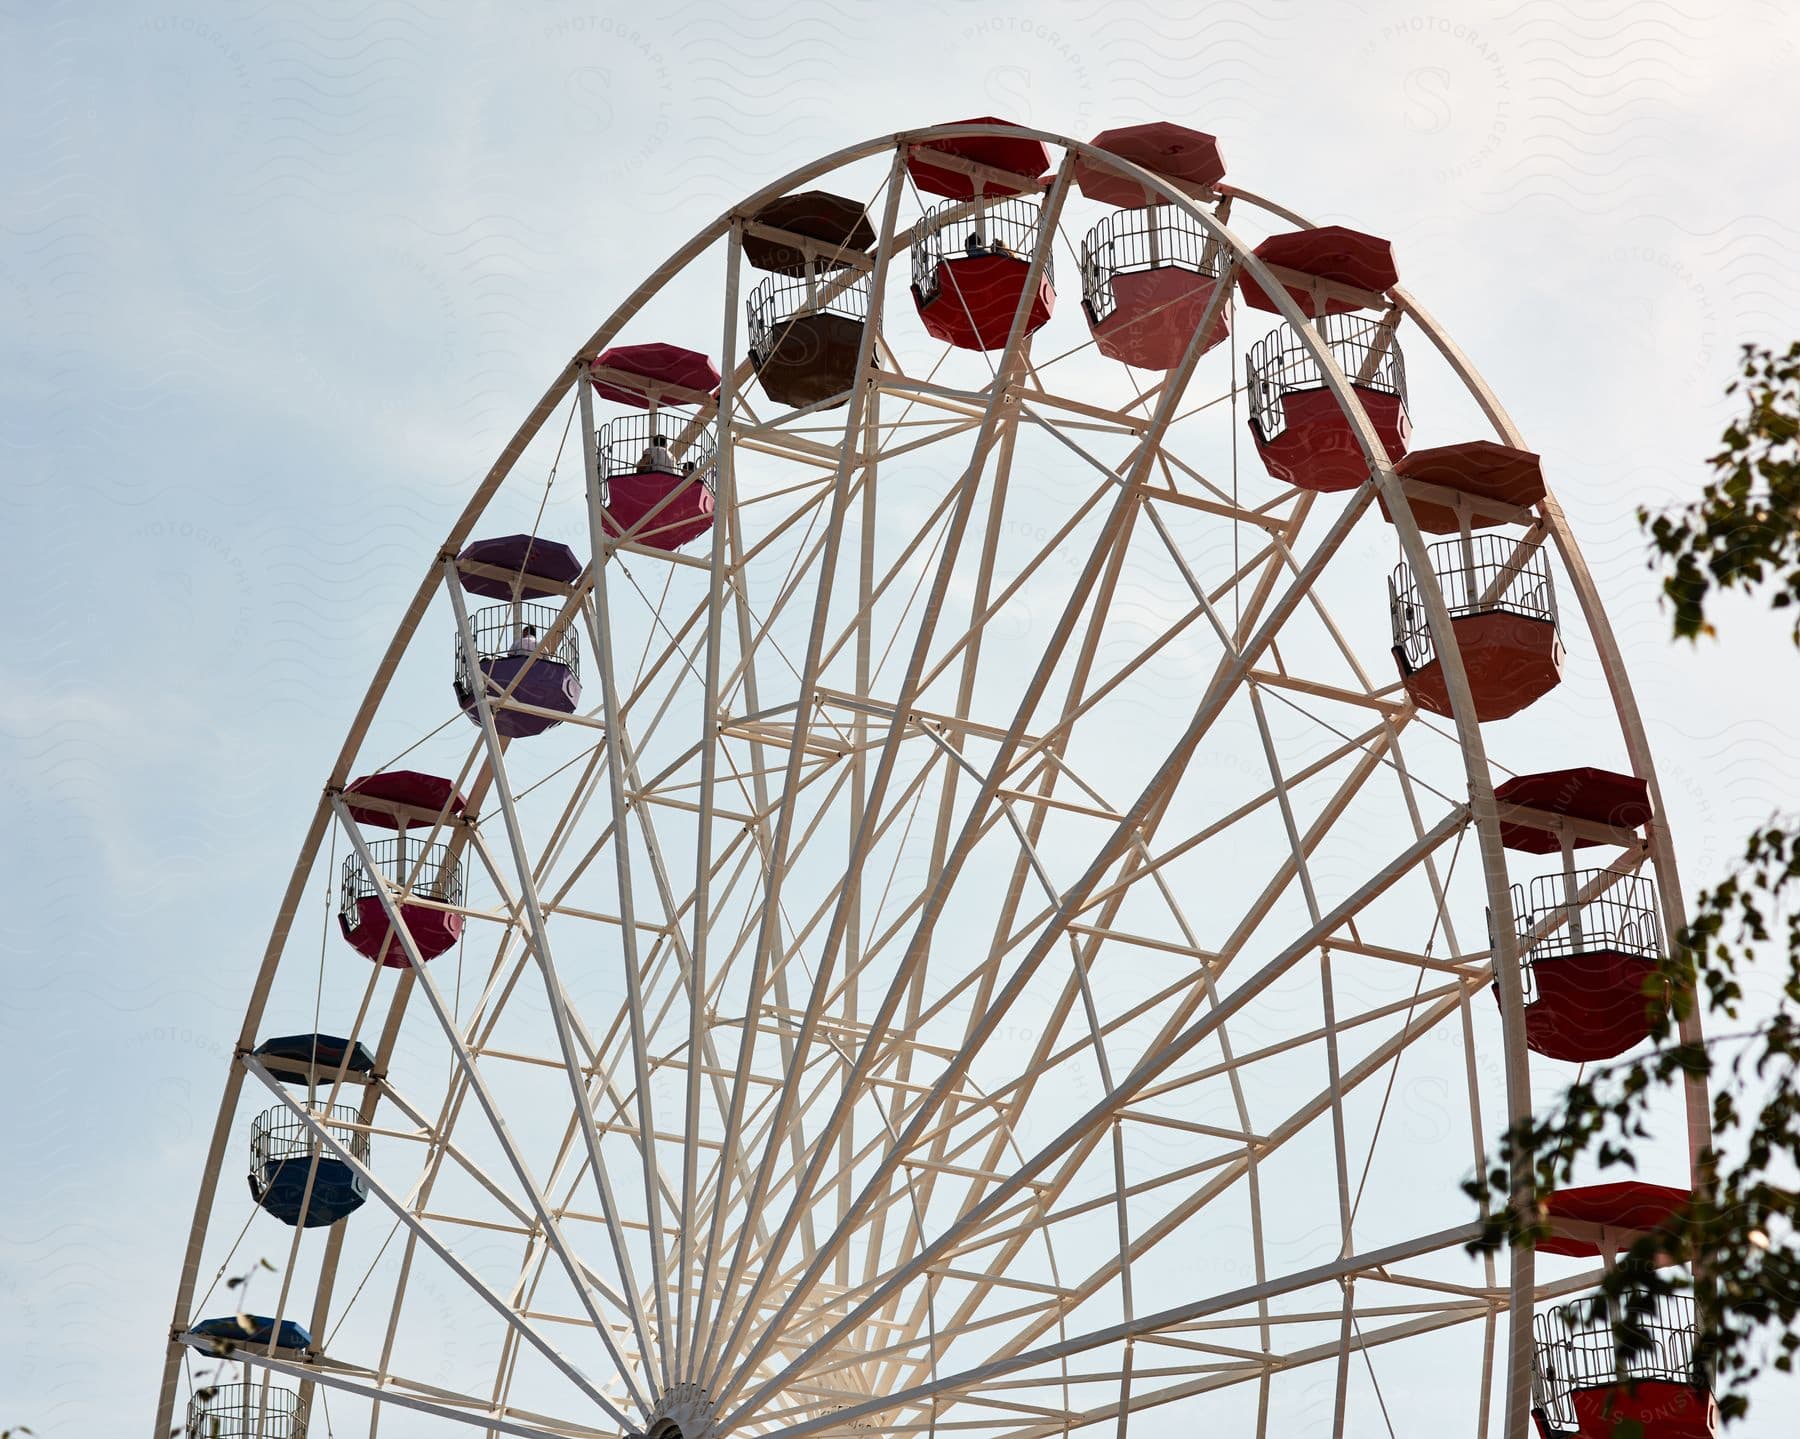 A red and white Ferris wheel.